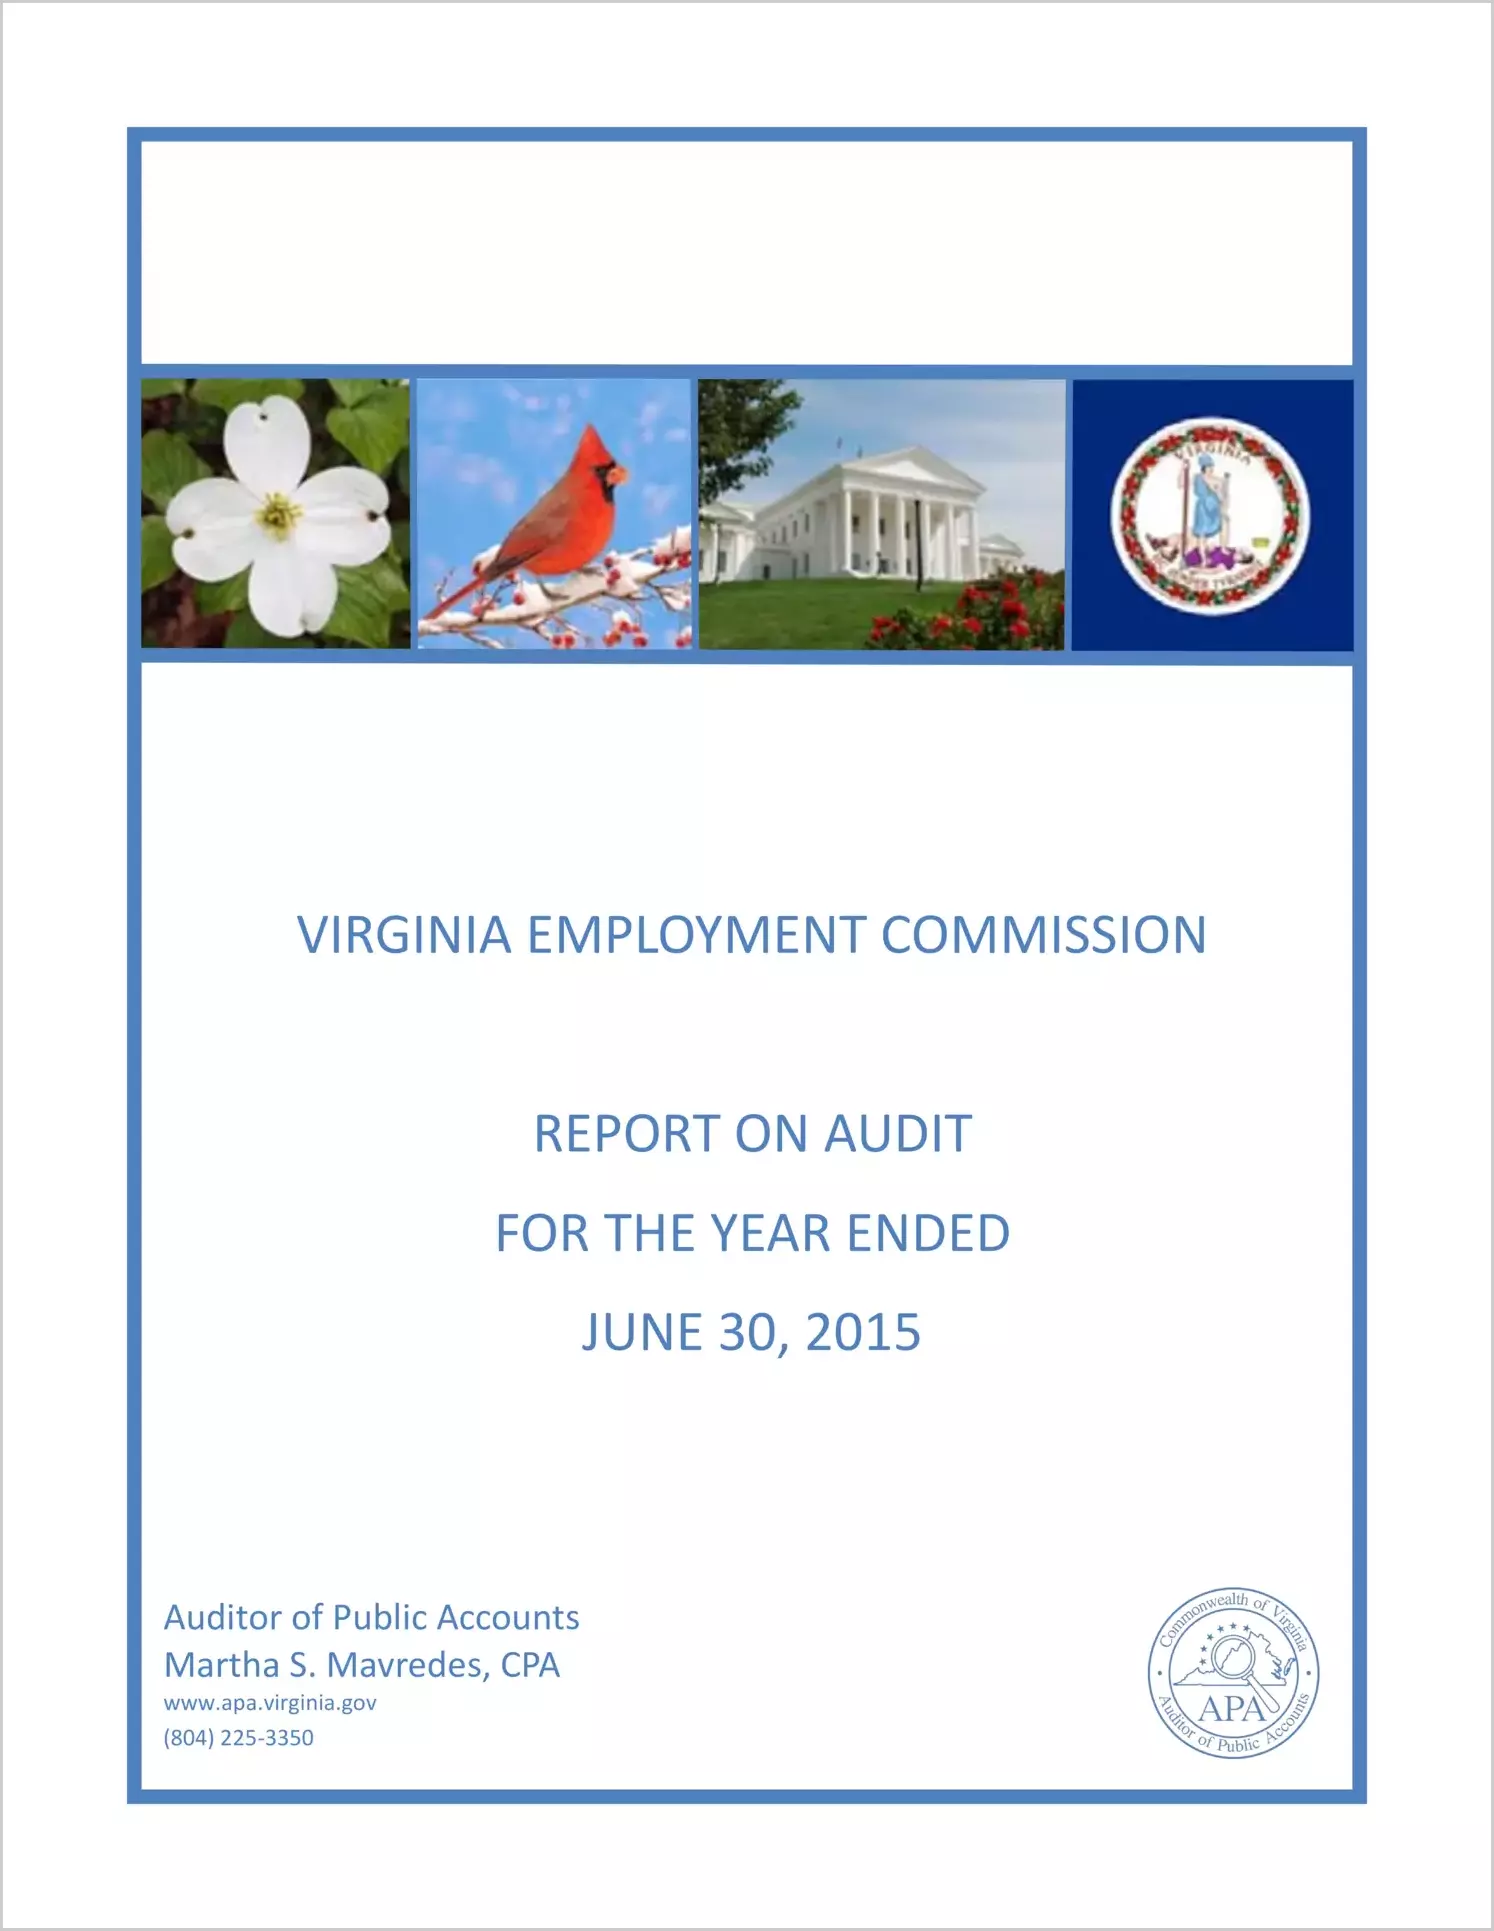 Virginia Employment Commission for the year ended June 30, 2015